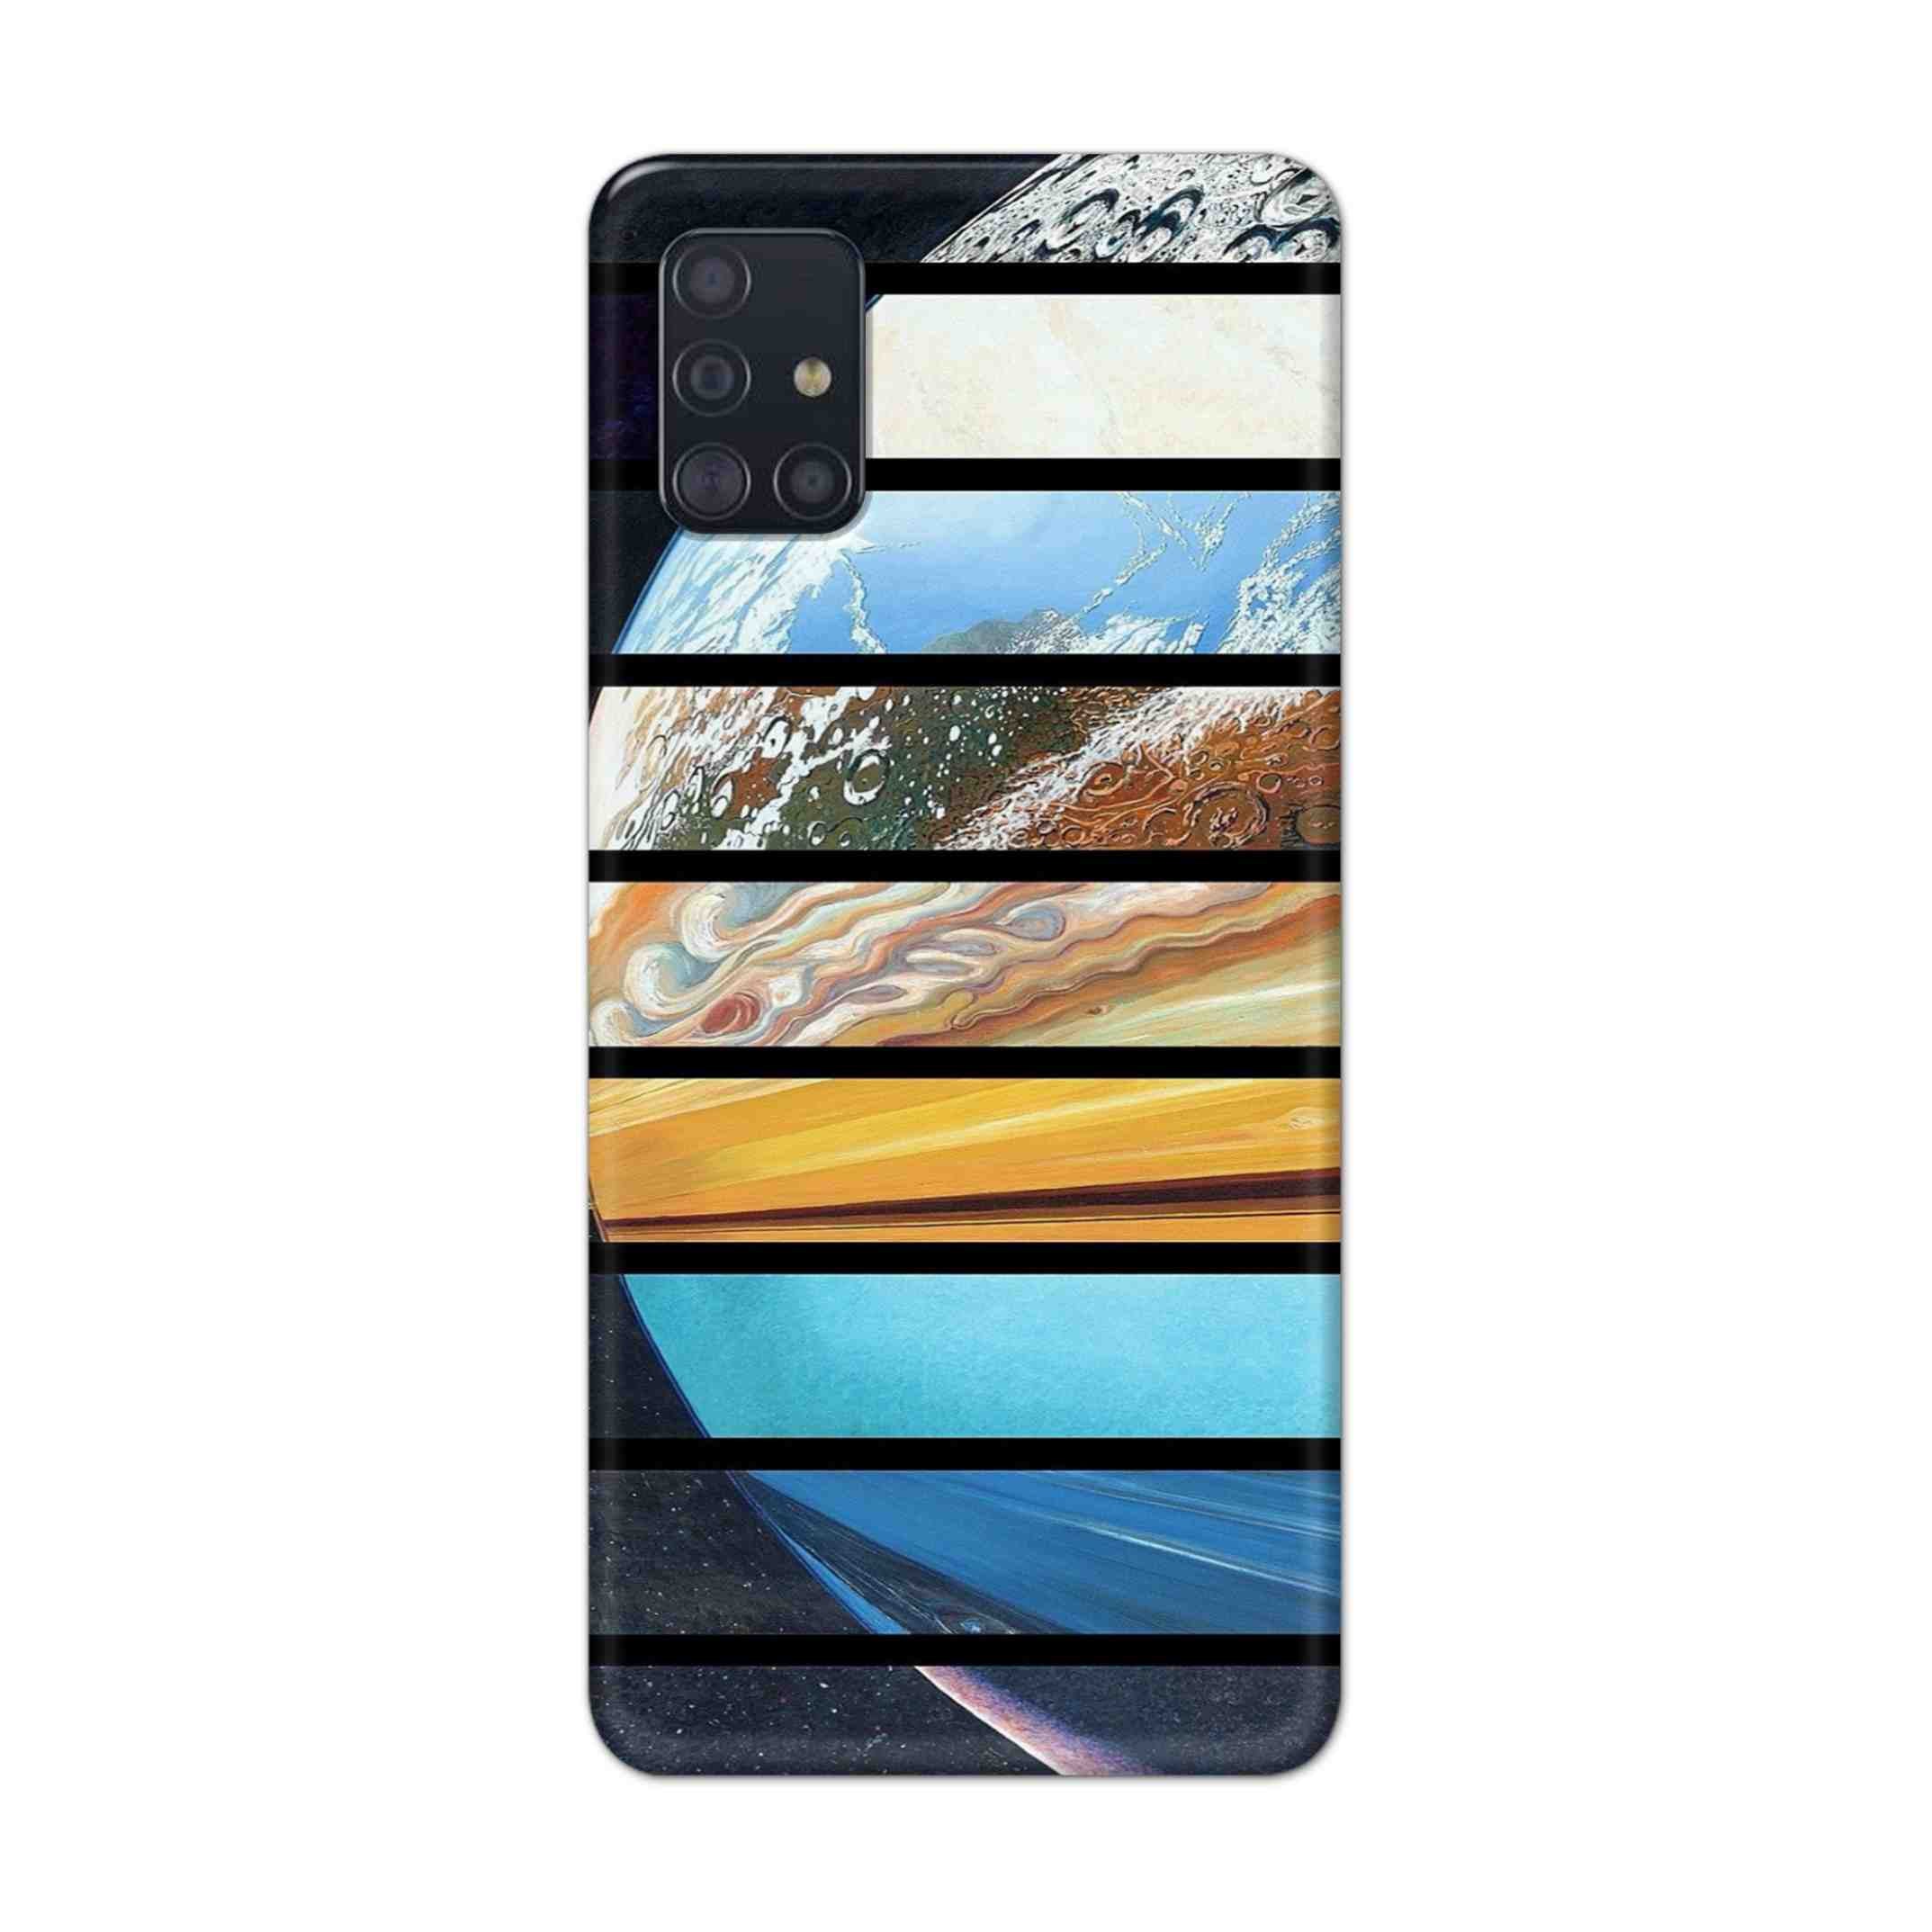 Buy Colourful Earth Hard Back Mobile Phone Case Cover For Samsung Galaxy M31s Online